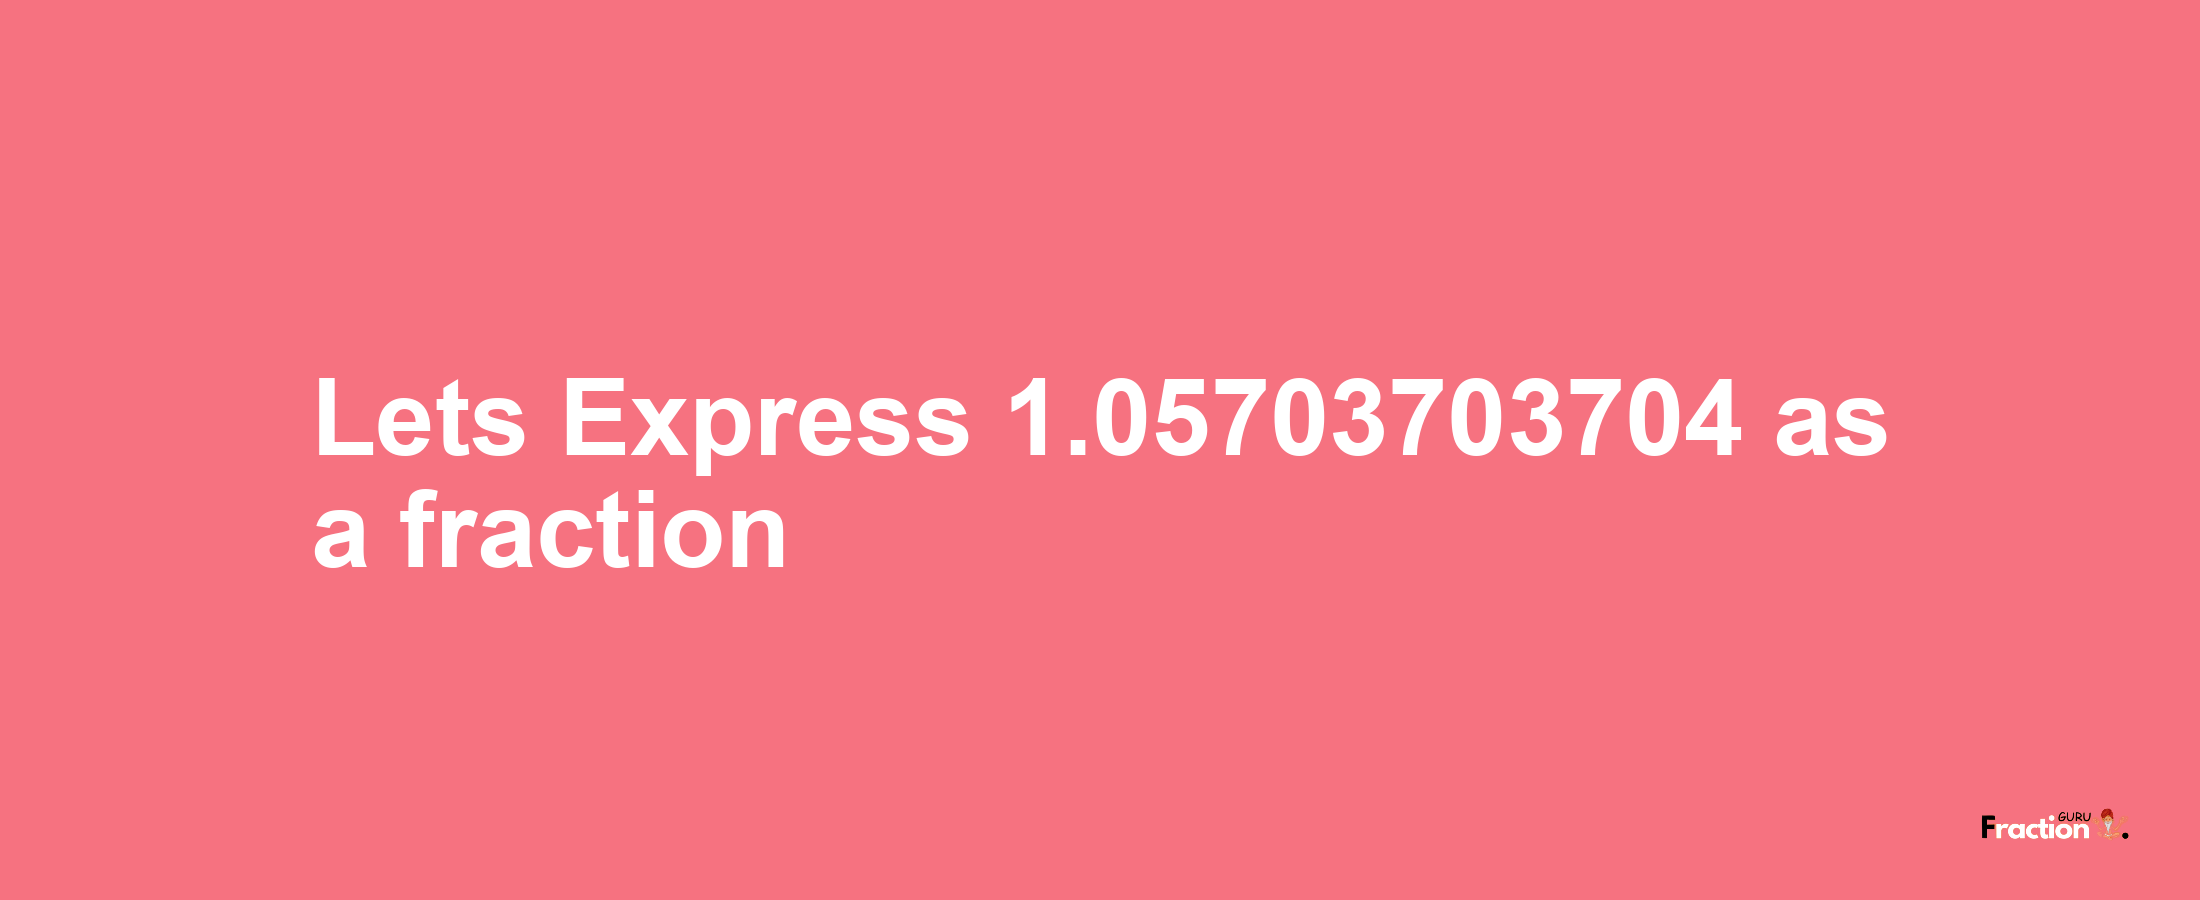 Lets Express 1.05703703704 as afraction